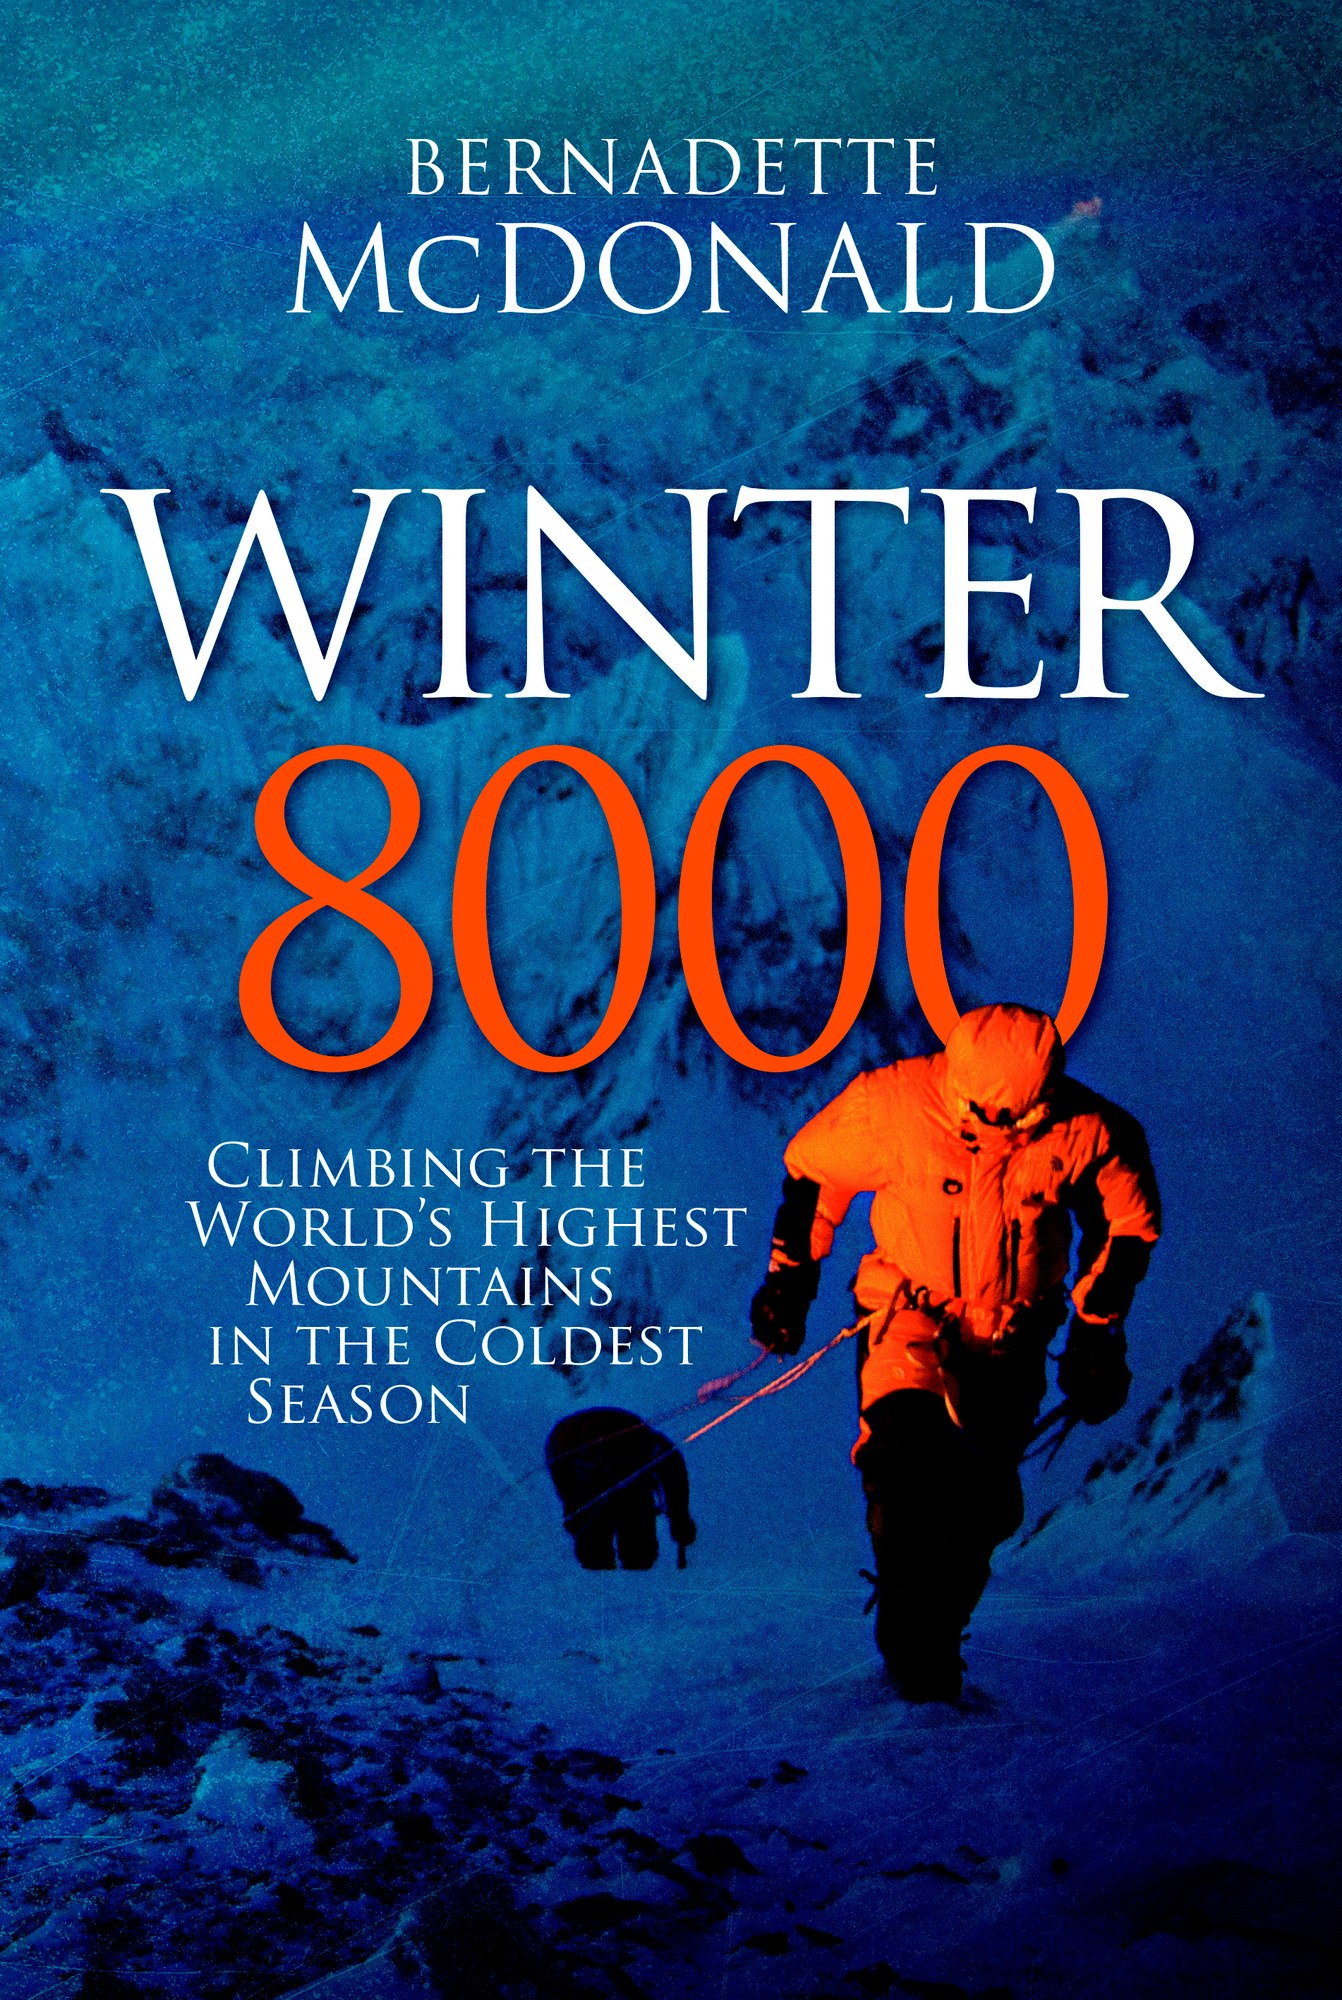 Winter 8000: Climbing the World's Highest Mountains in the Coldest